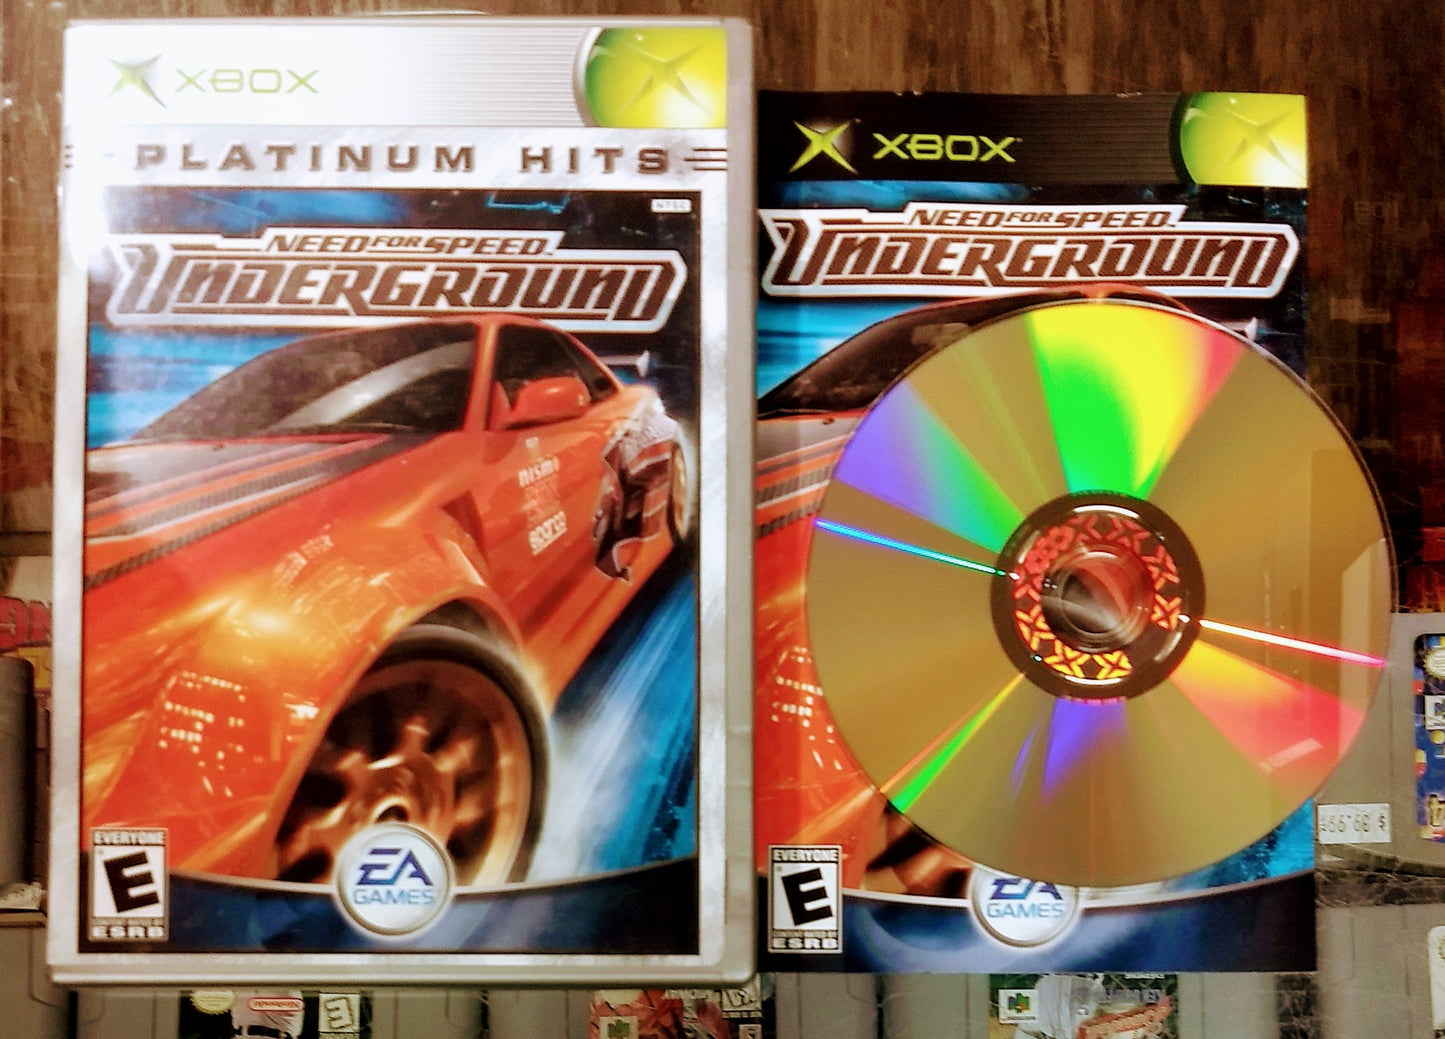 NEED FOR SPEED UNDERGROUND NFSU PLATINUM HITS XBOX - jeux video game-x